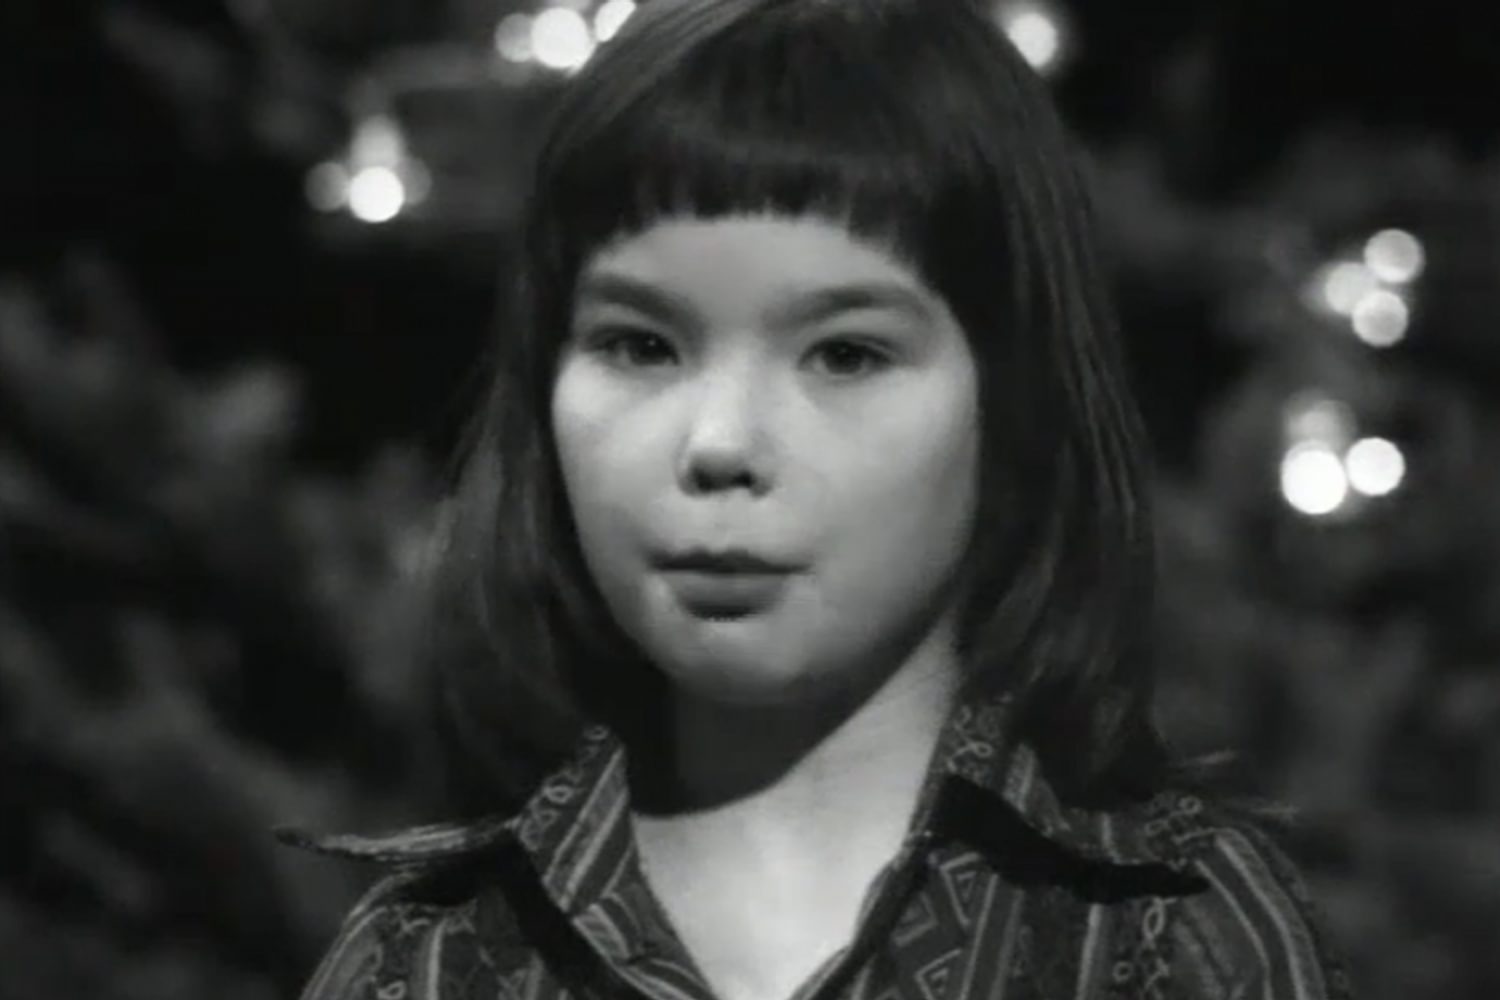 Watch an 11-year-old Björk read the Christmas nativity story on Icelandic television